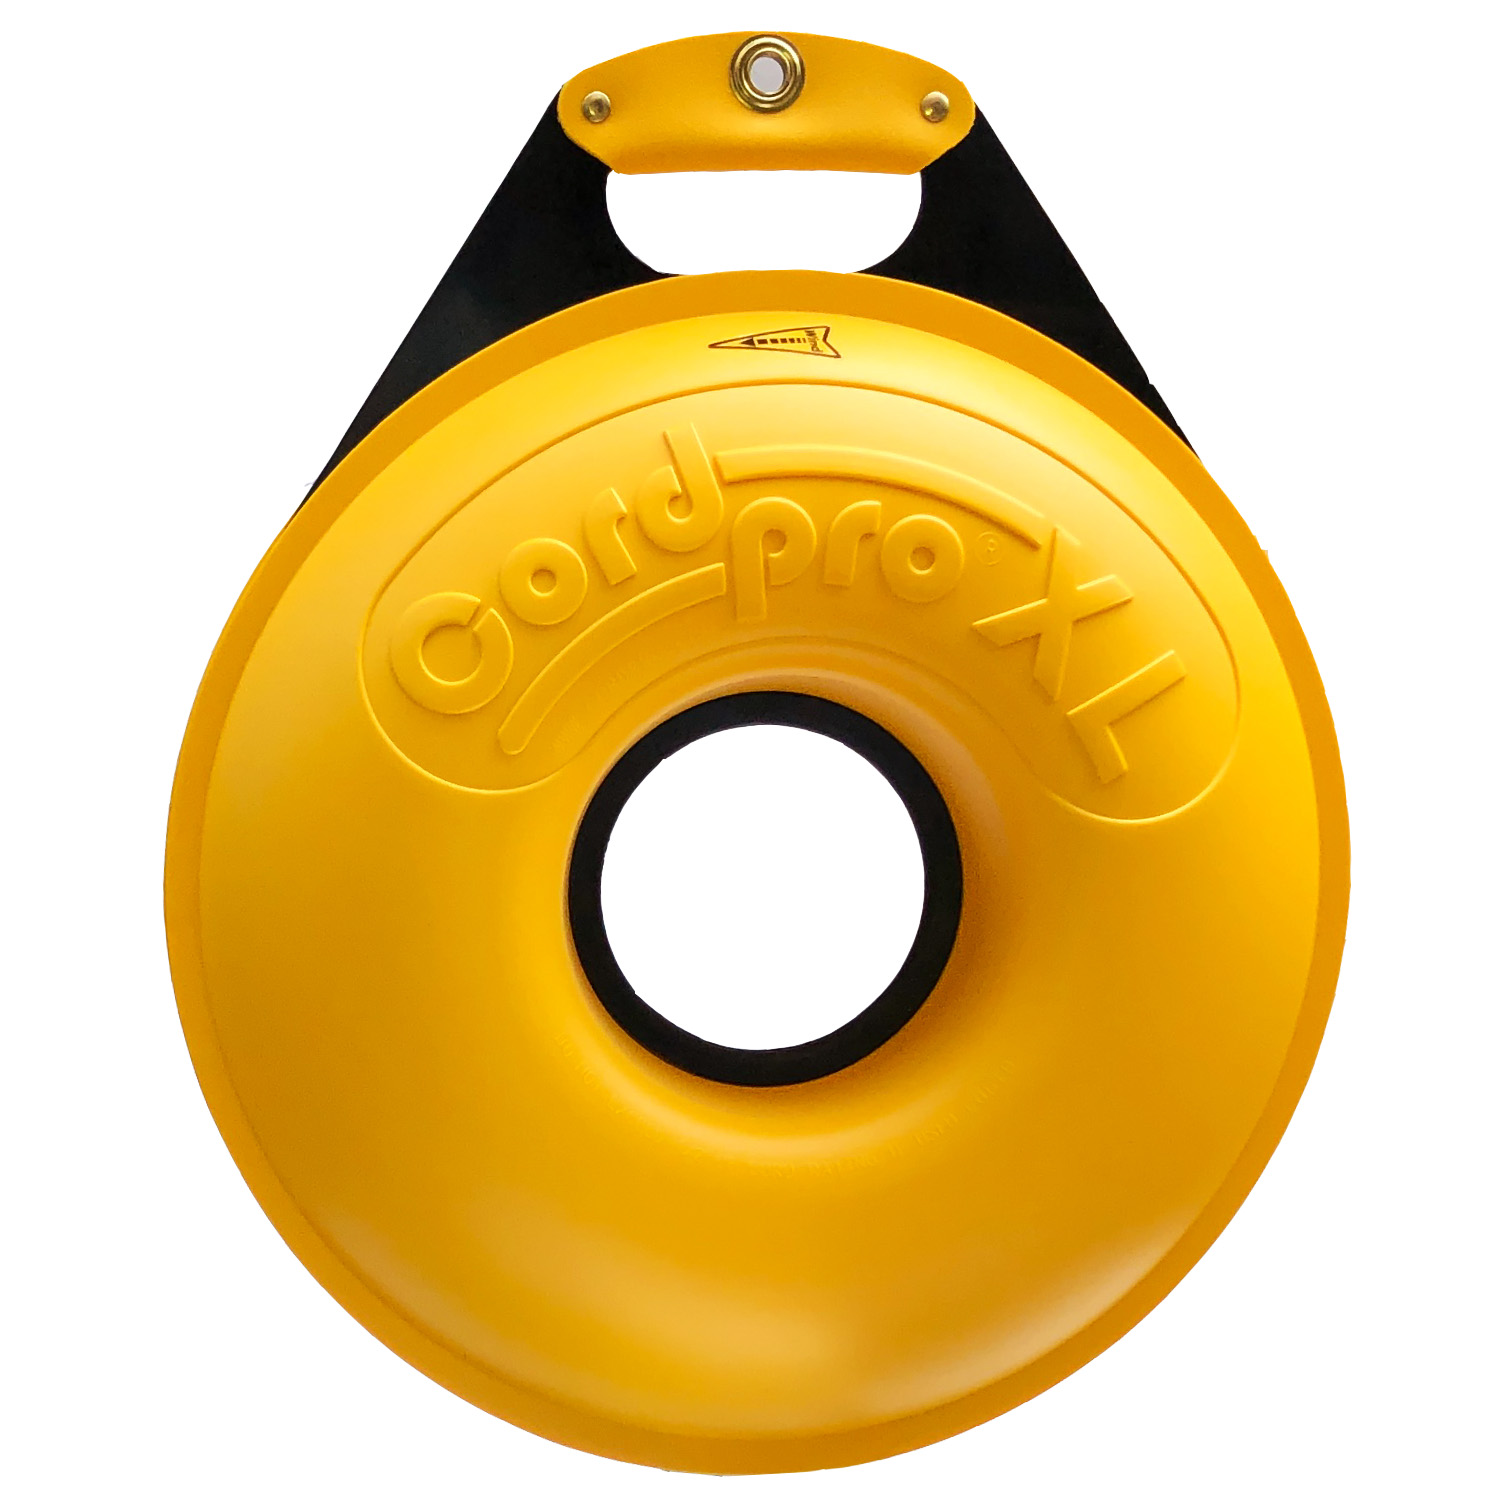 CP-XL – Extra Large Cordpro® Cord Reel